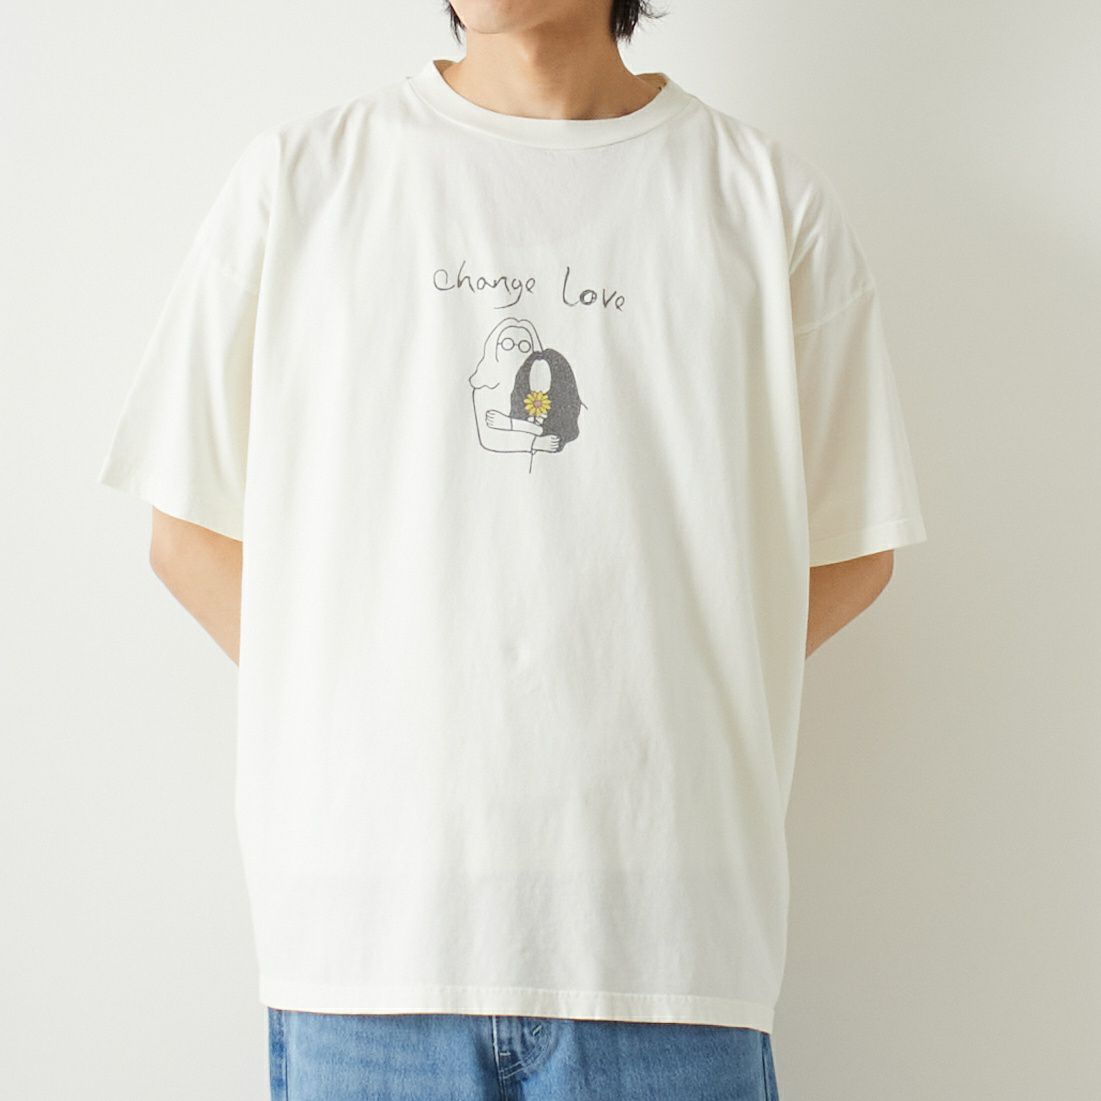 REMI RELIEF [レミレリーフ] 別注 20天竺プリントTシャツ CHANGE [RN24329257-JF] OFF &&モデル身長：182cm 着用サイズ：M&&